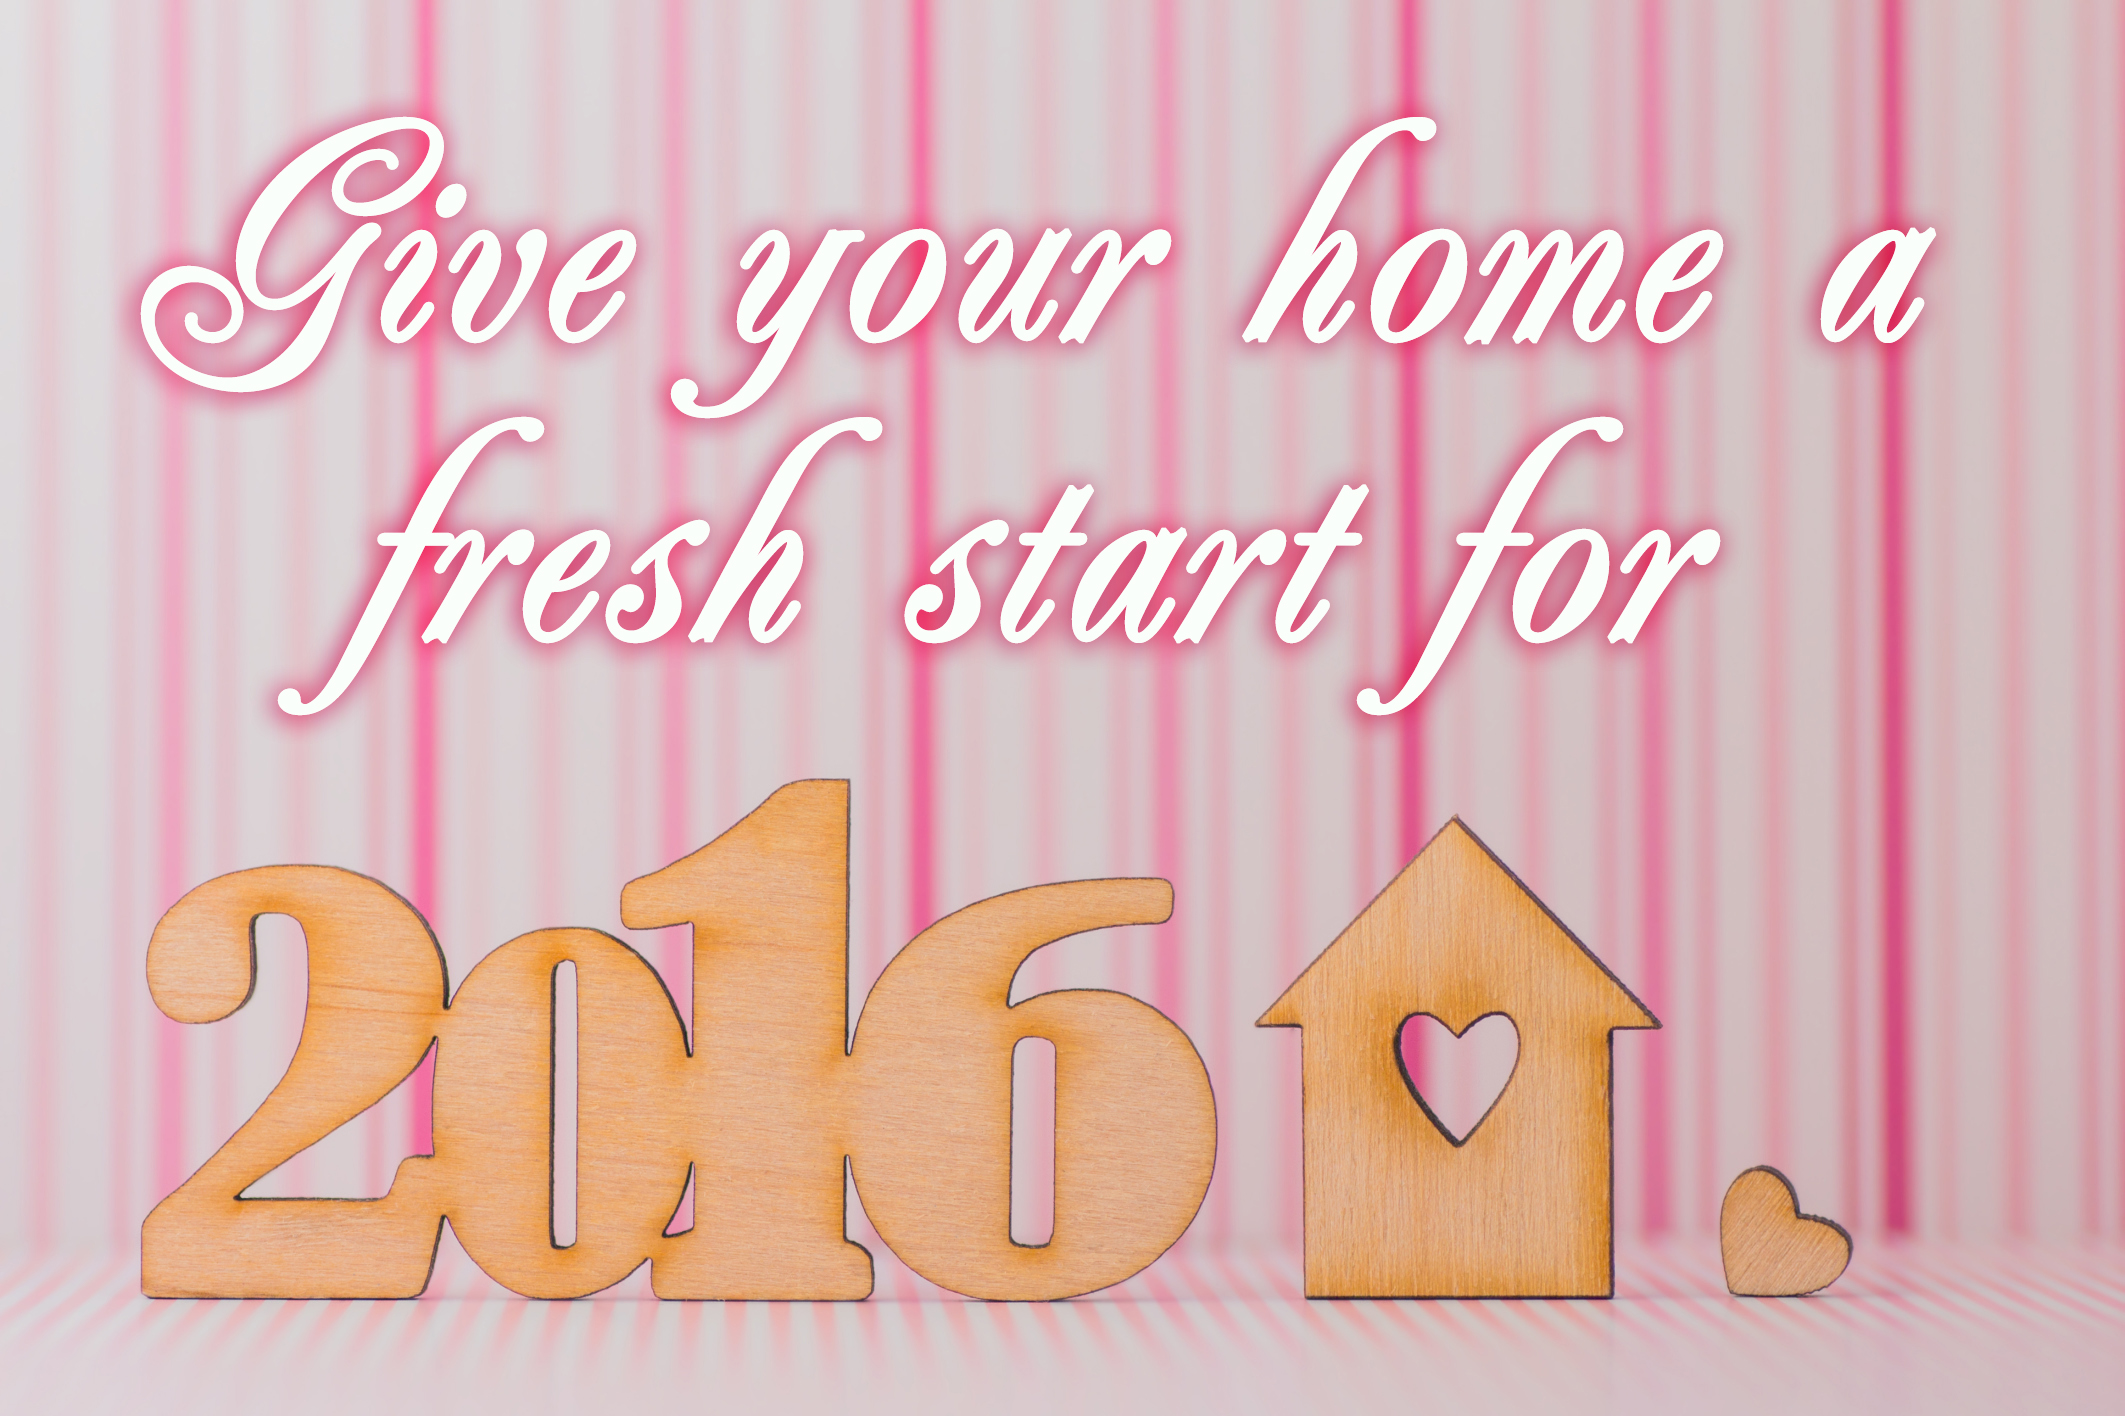 Give your home a fresh start for 2016